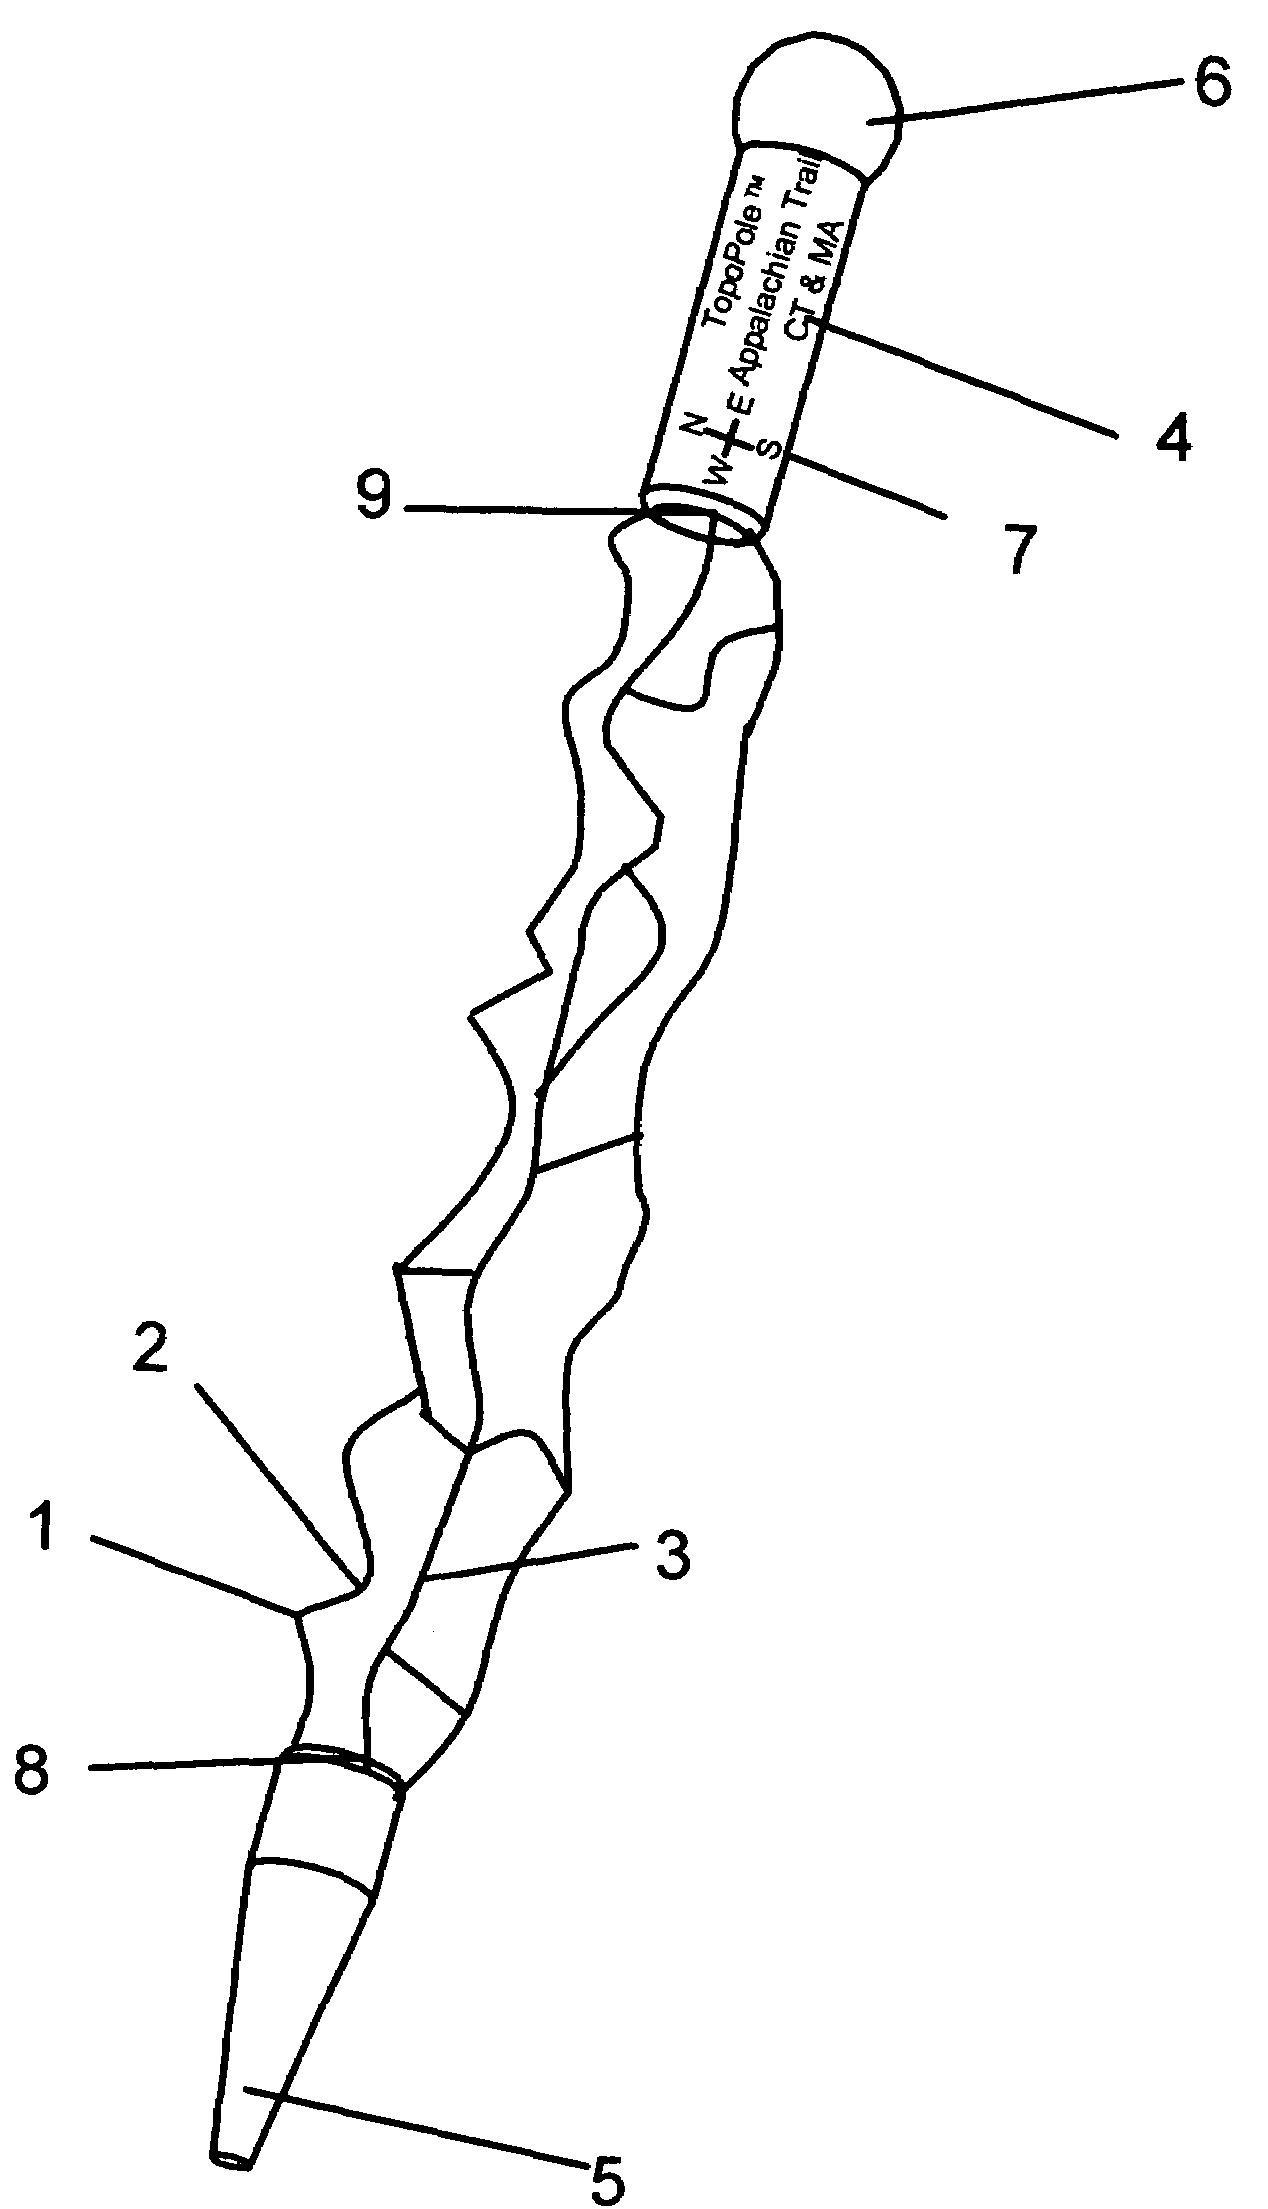 Hiking staff, ski pole, or boat paddle, with integrated topographical representations of trails and or terrain